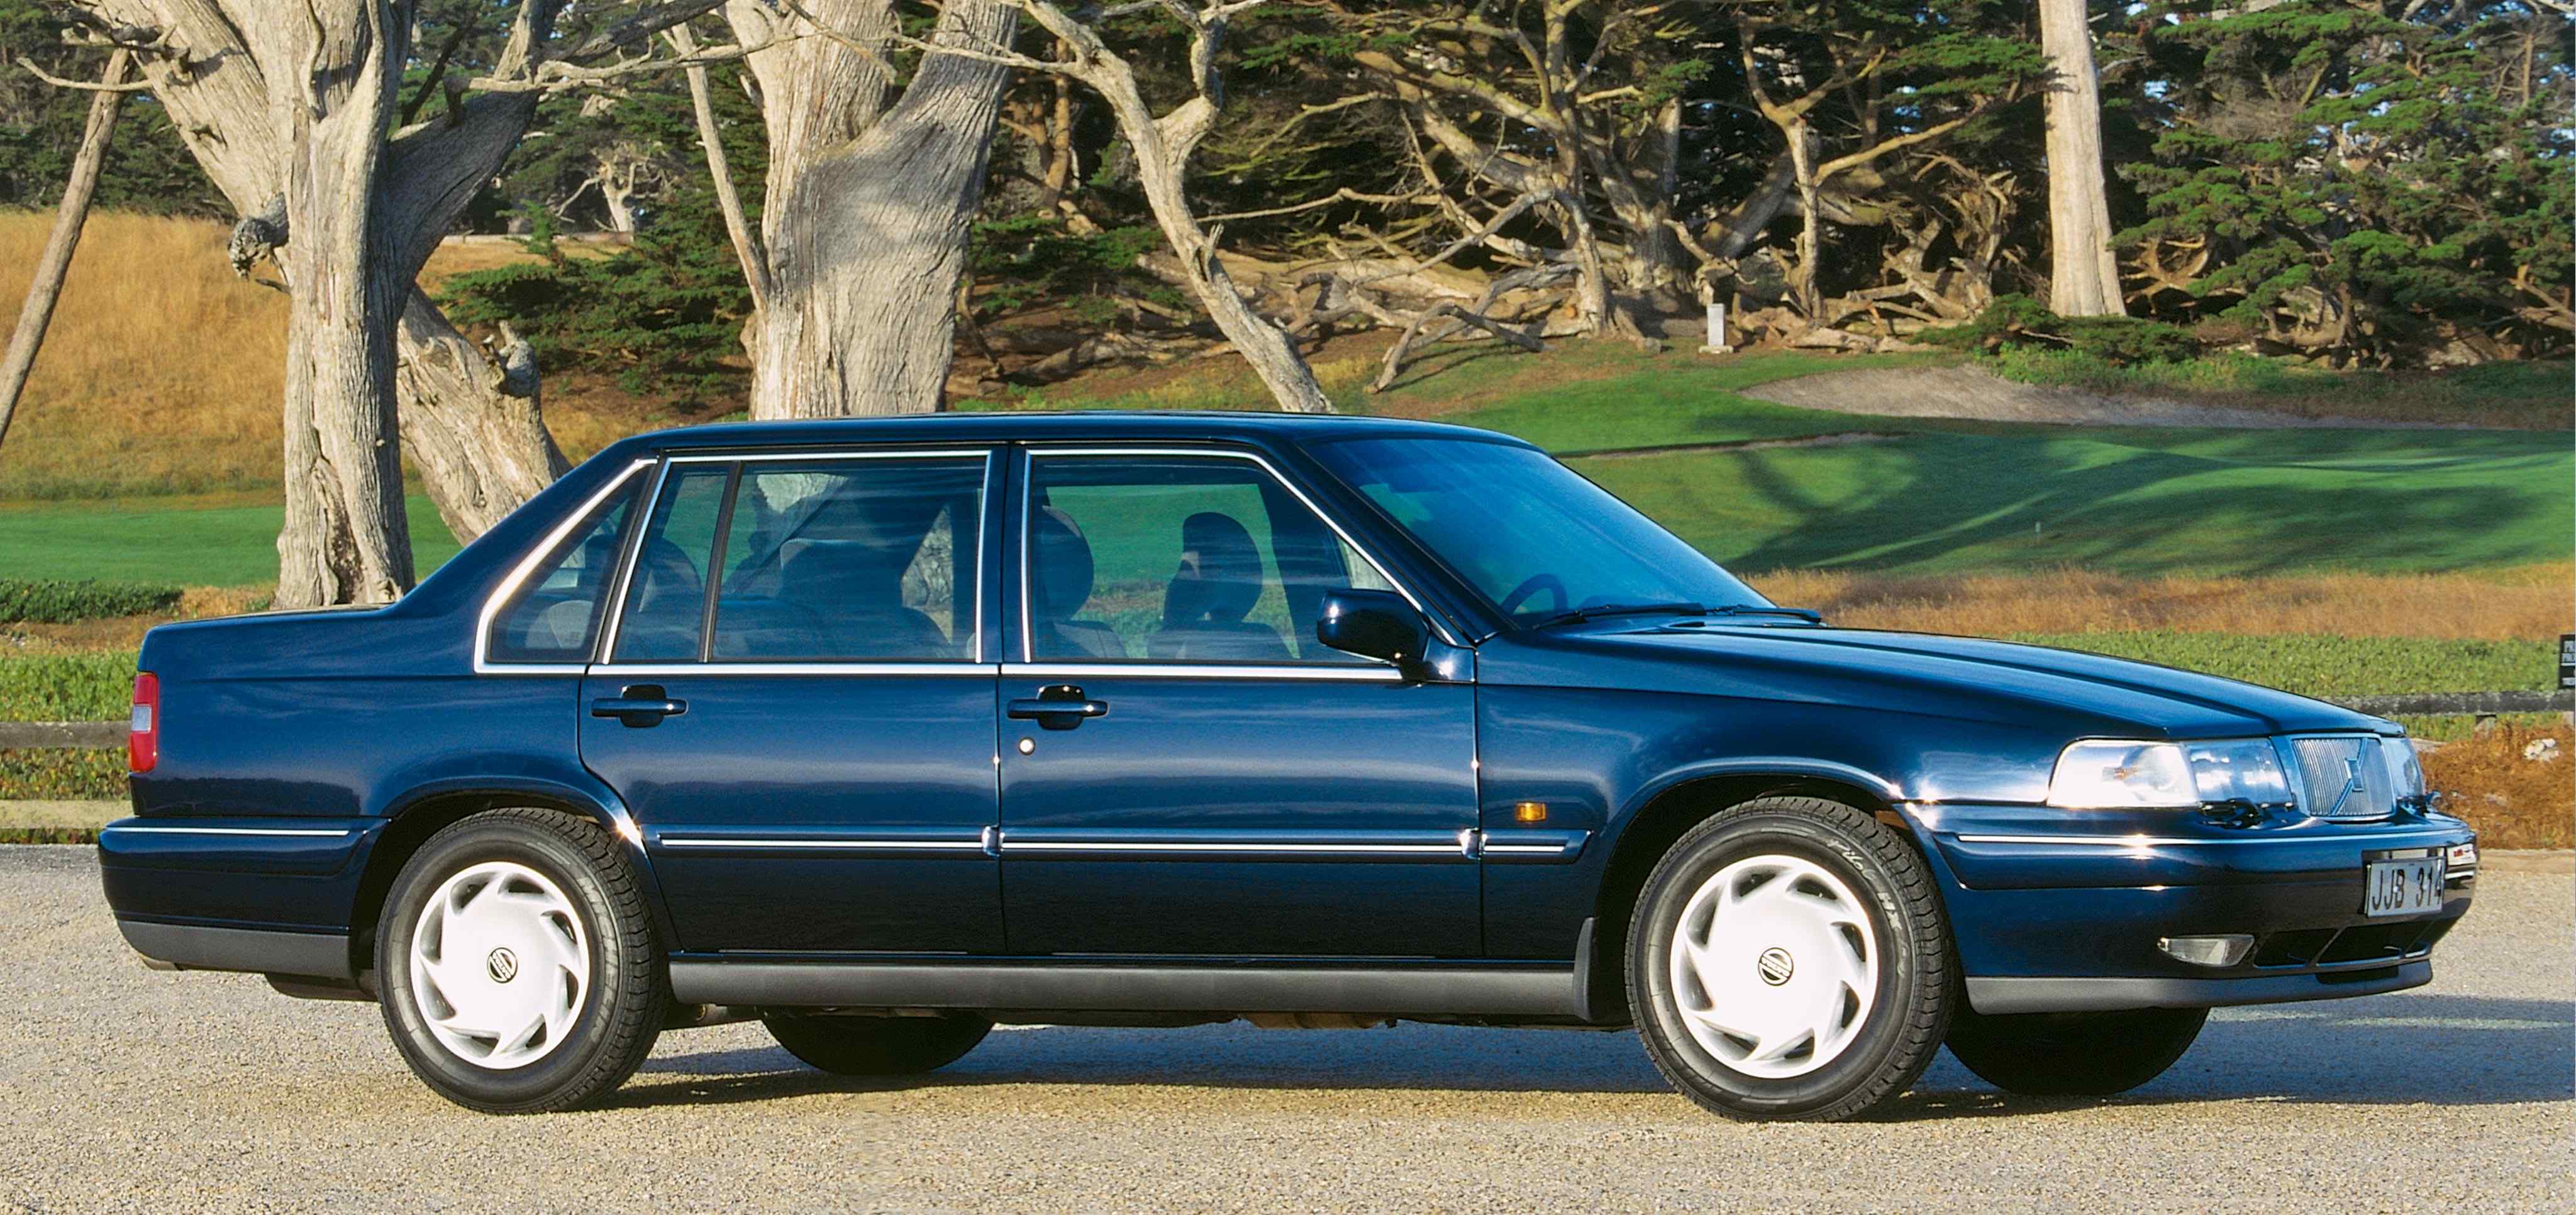 A blue Volvo 960 sedan parked in natural surroundings